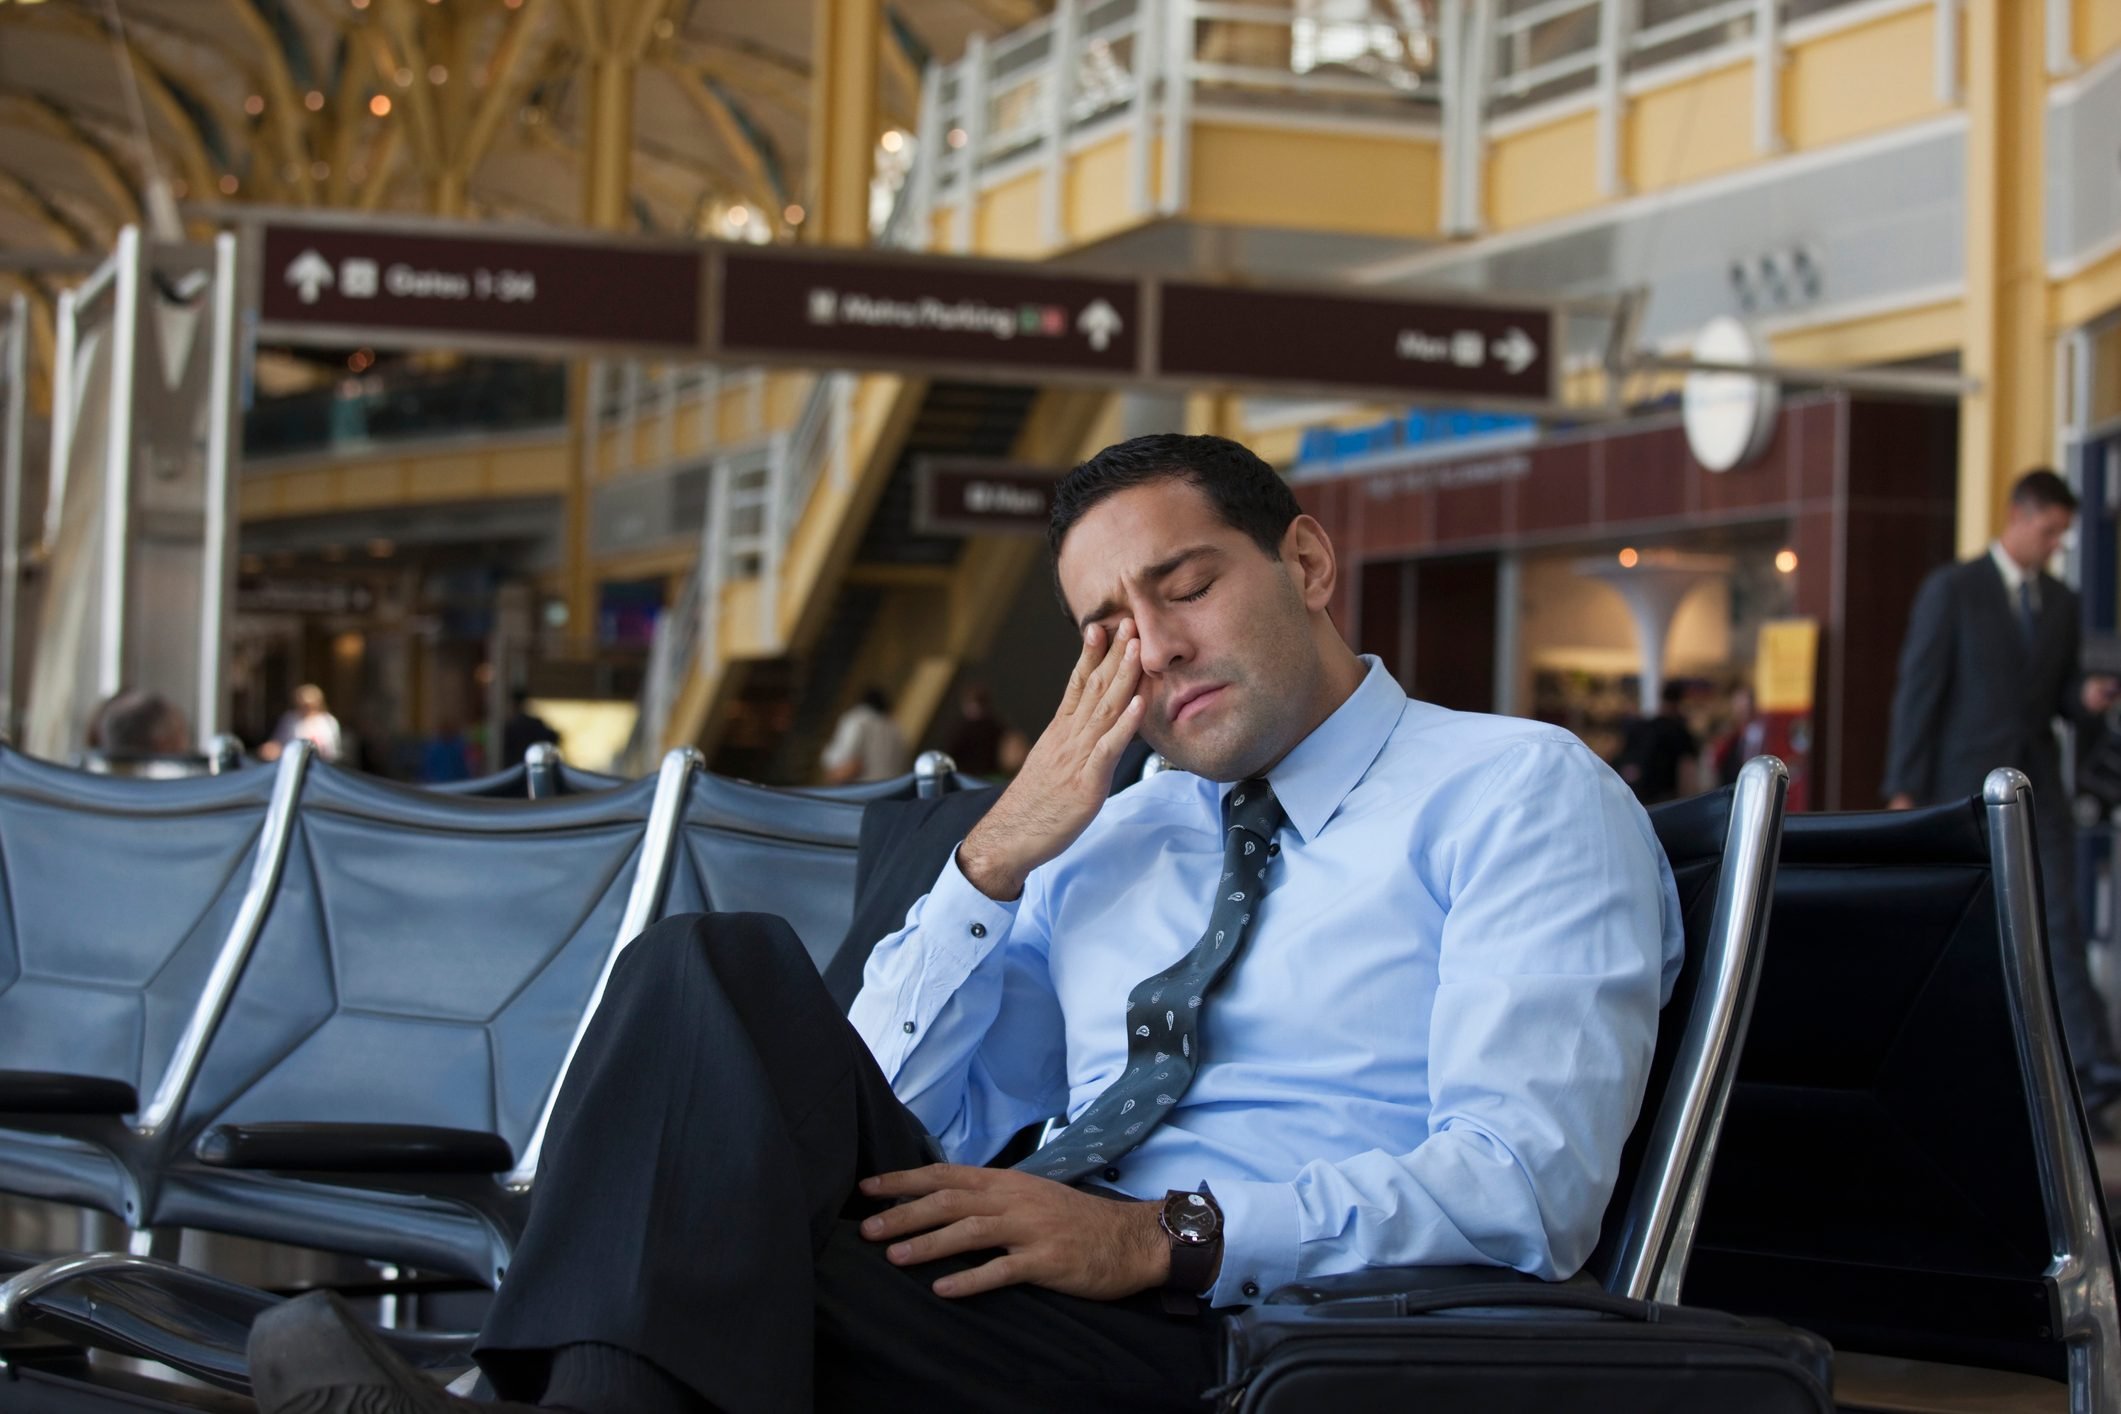 How long can you leave an airport during a layover?